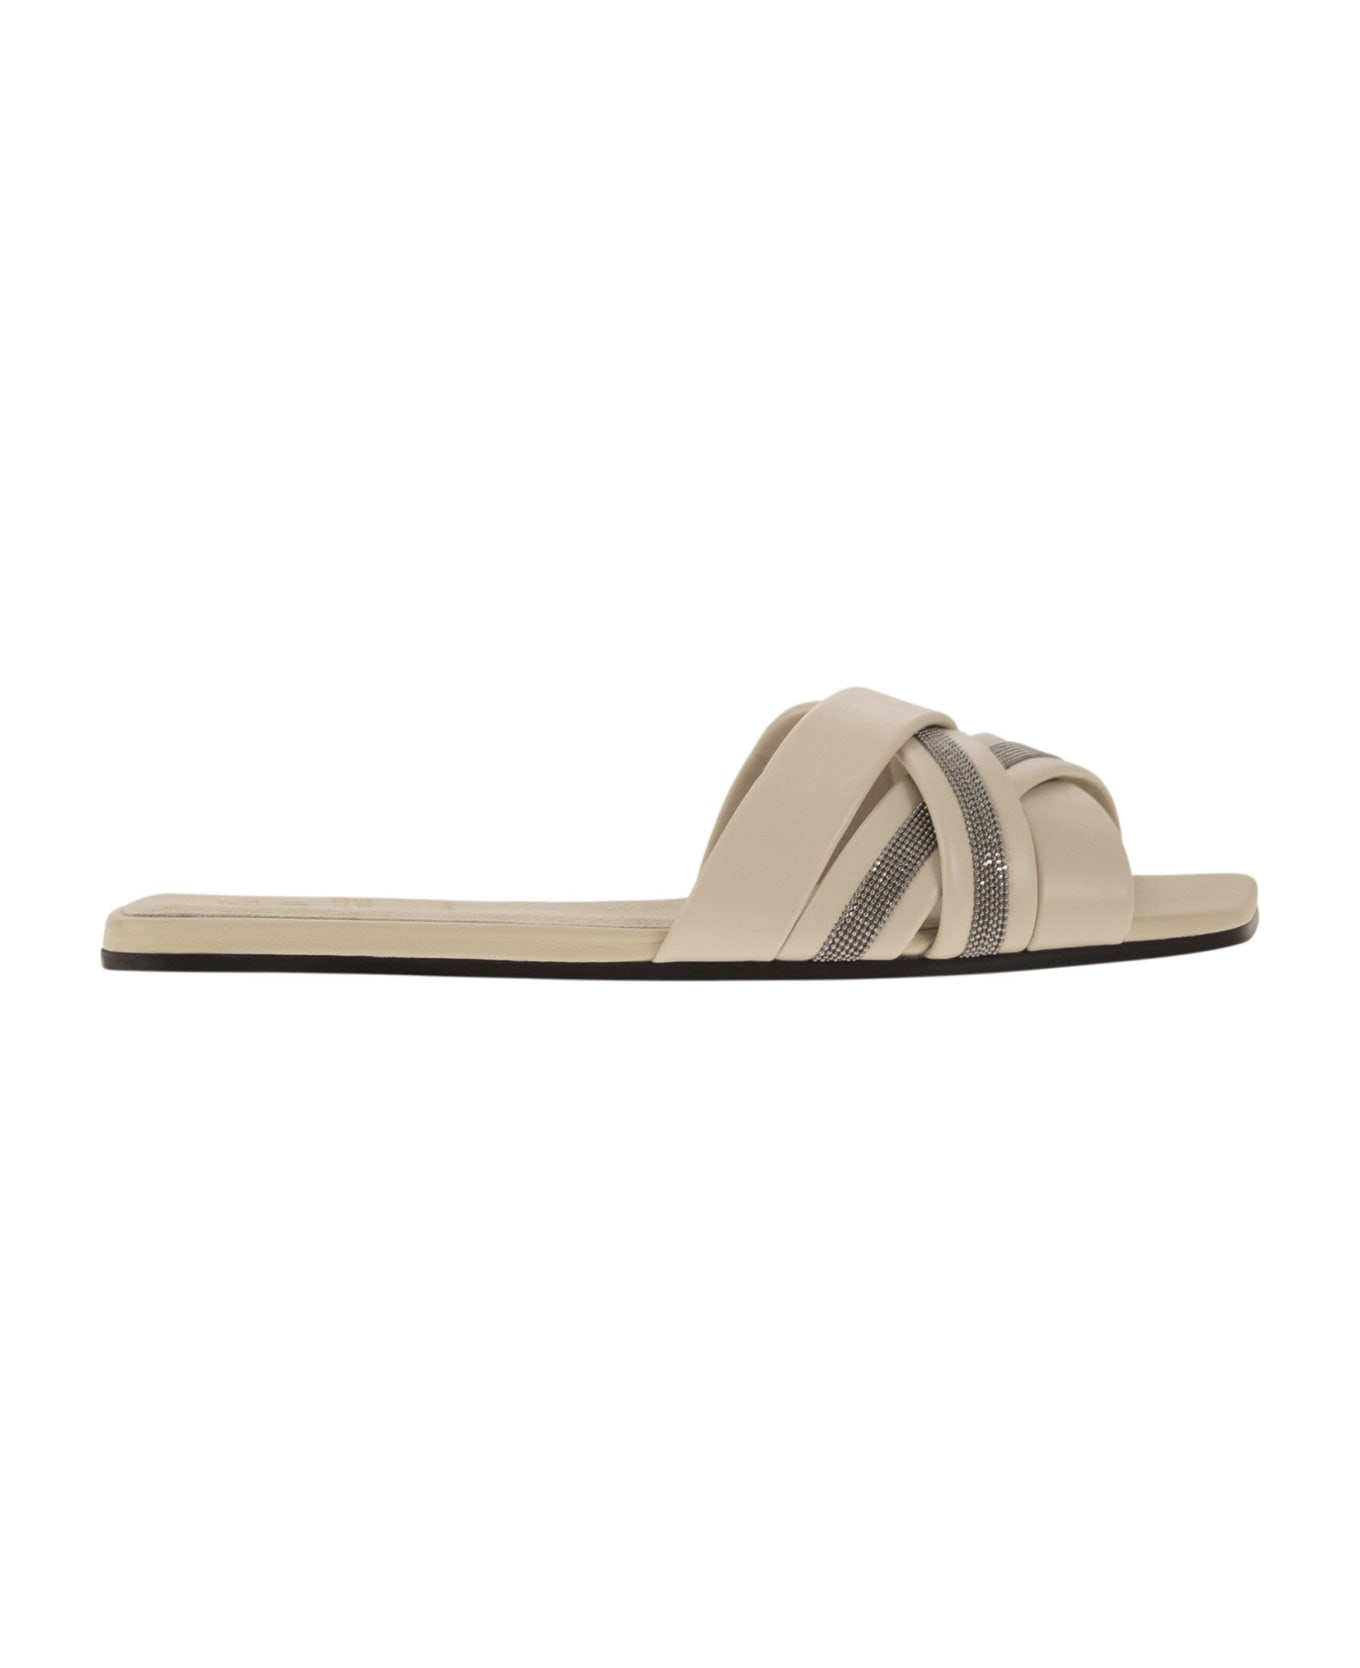 Brunello Cucinelli Nappa Leather Slides With Jewellery - Ivory サンダル